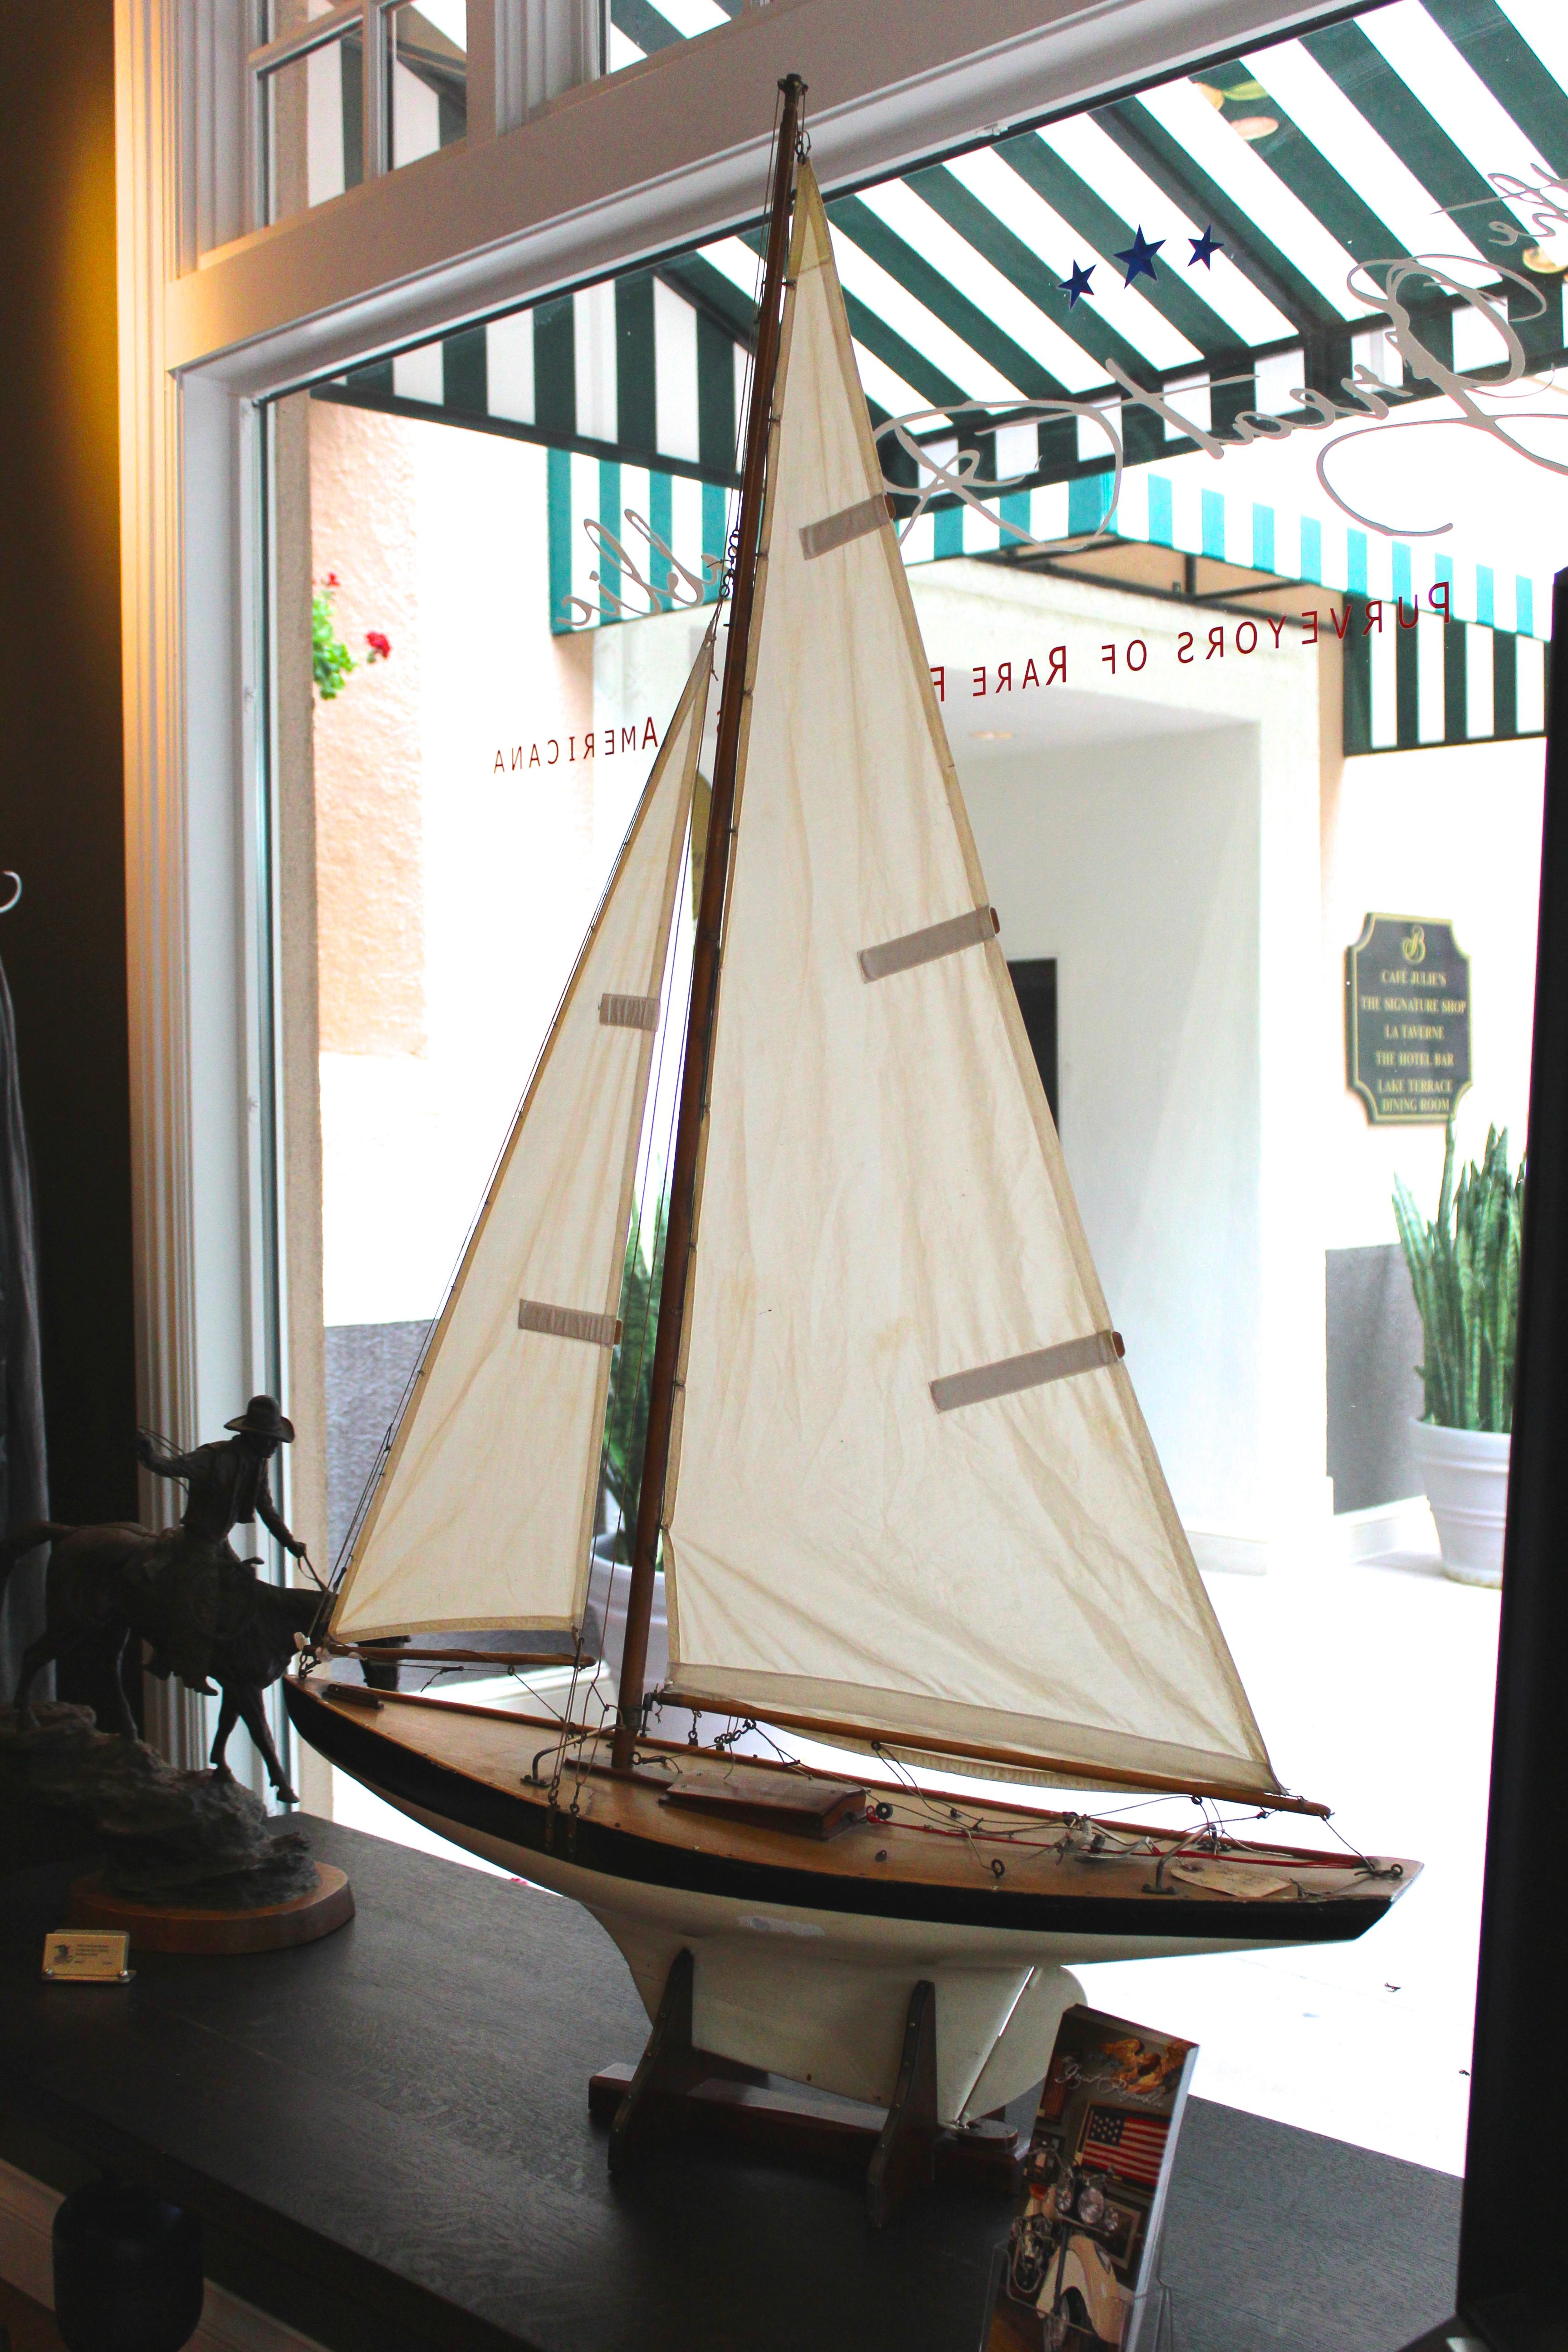 This antique wooden pond yacht was built in 1910 and would have been raced on British ponds. Model, or pond, yachting was the pastime of building and racing model yachts. It was customary for ship builders to make a miniature model of their vessels